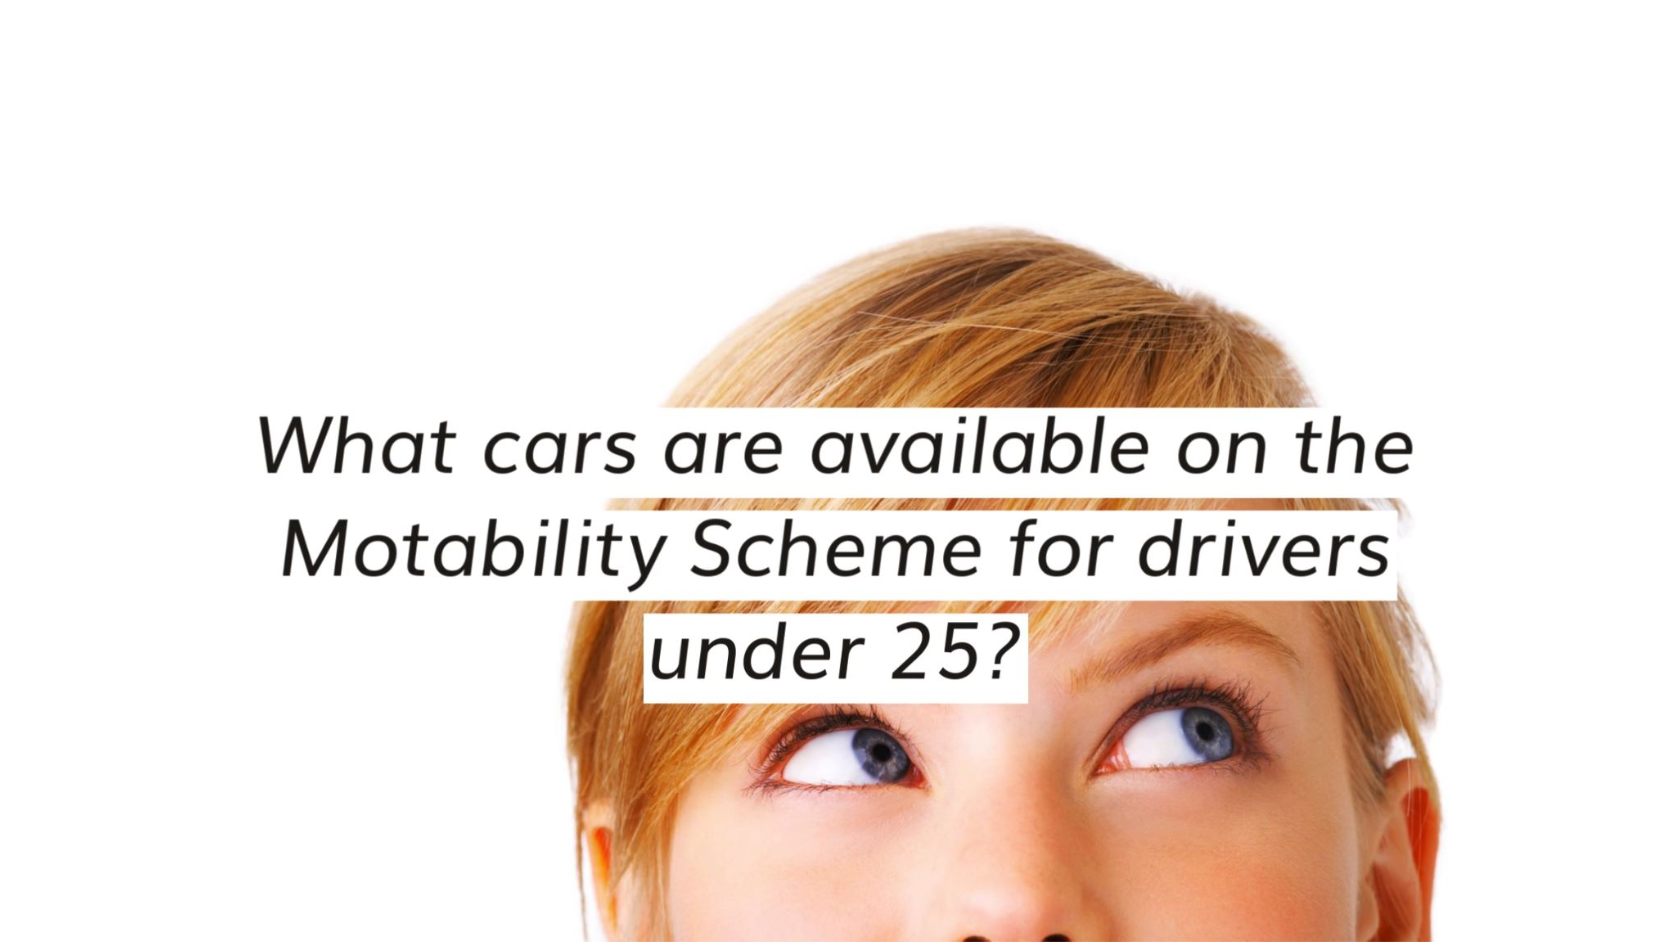 Motability for under 25's